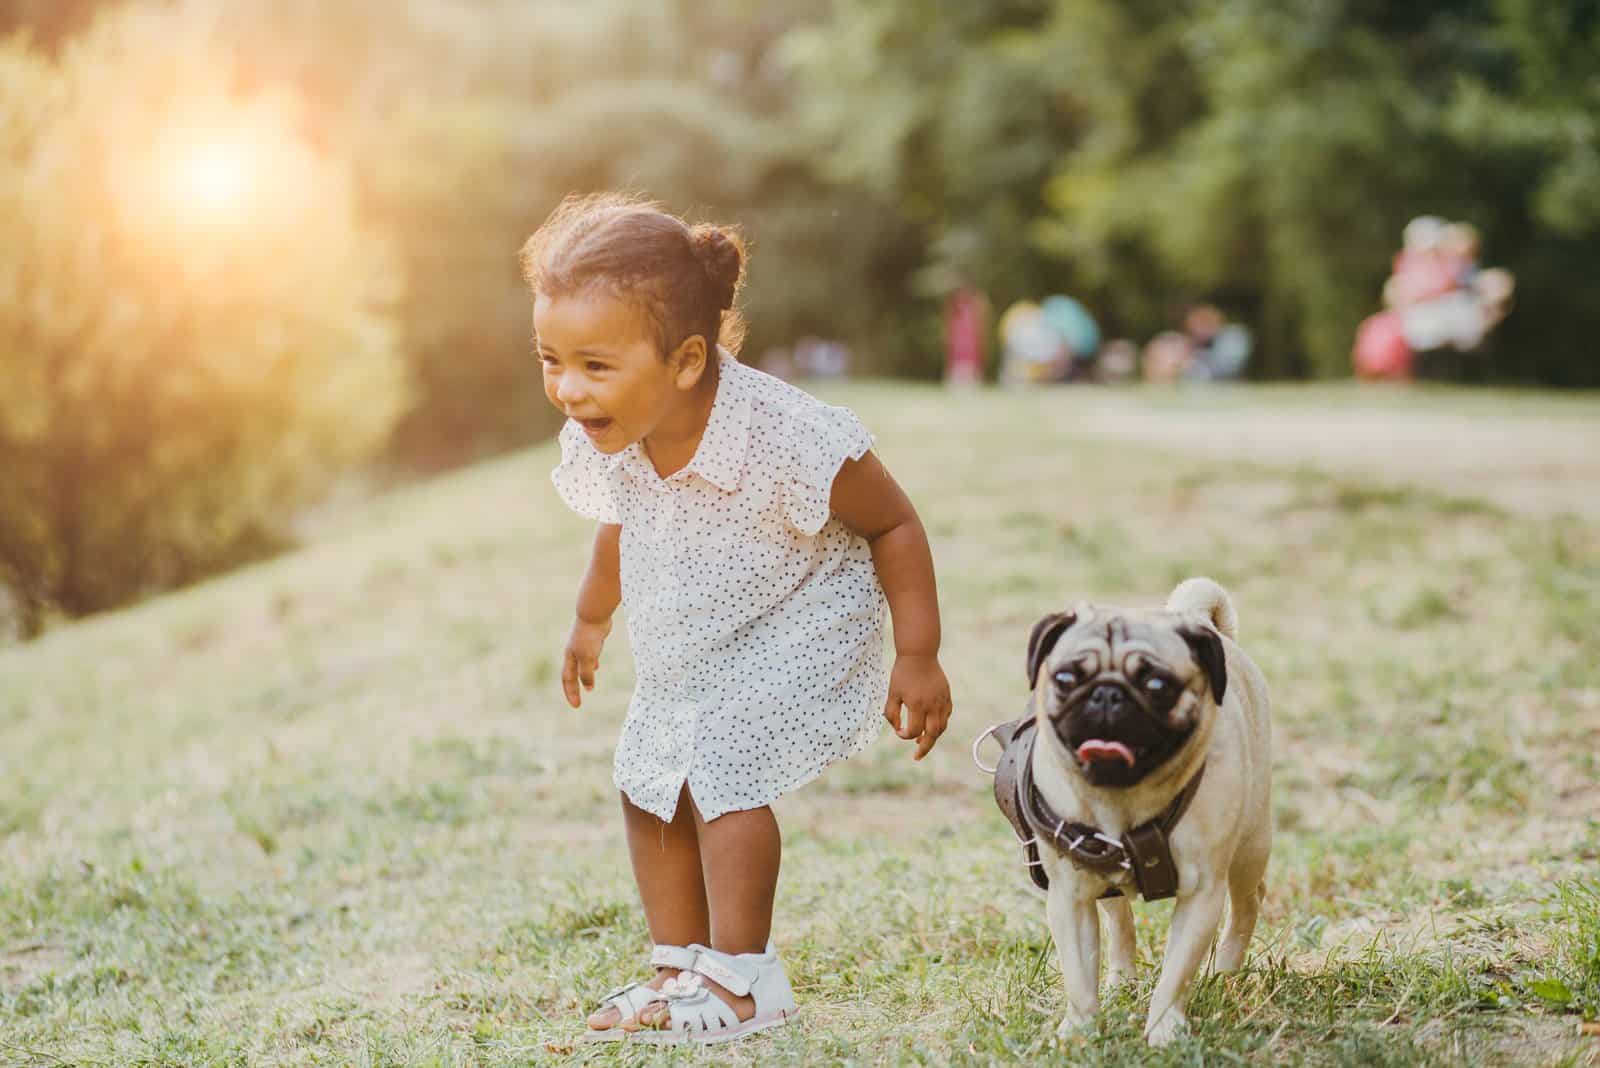 the child runs with Pug across the field